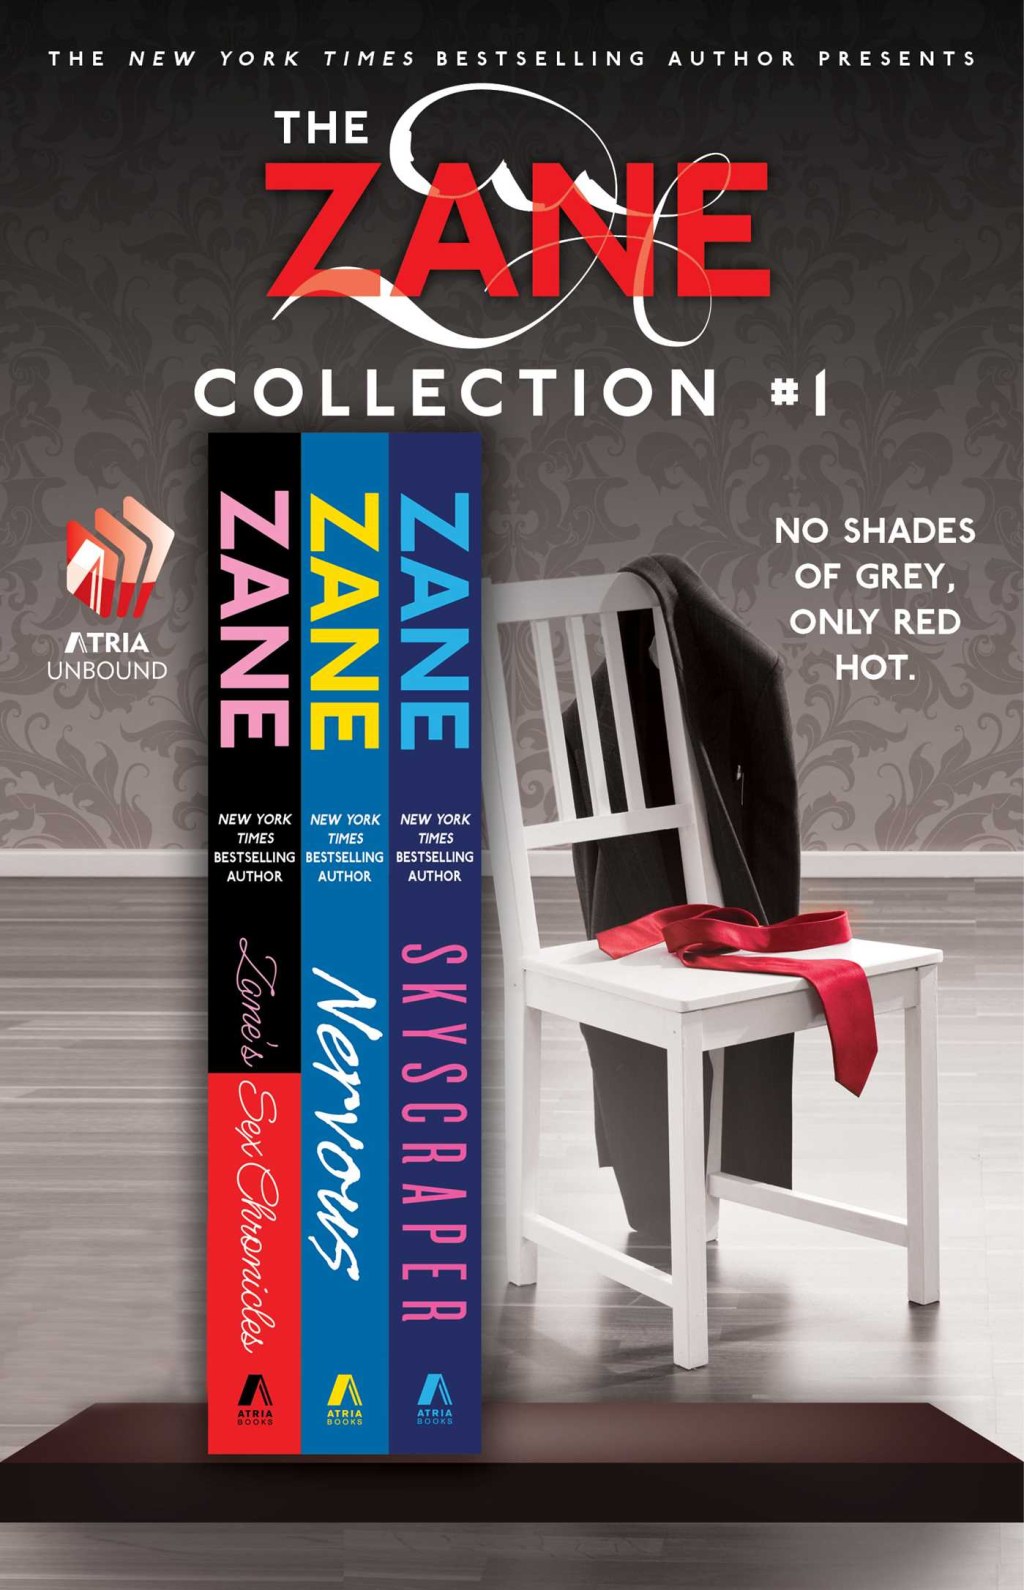 Picture of: The Zane Collection # eBook by Zane  Official Publisher Page